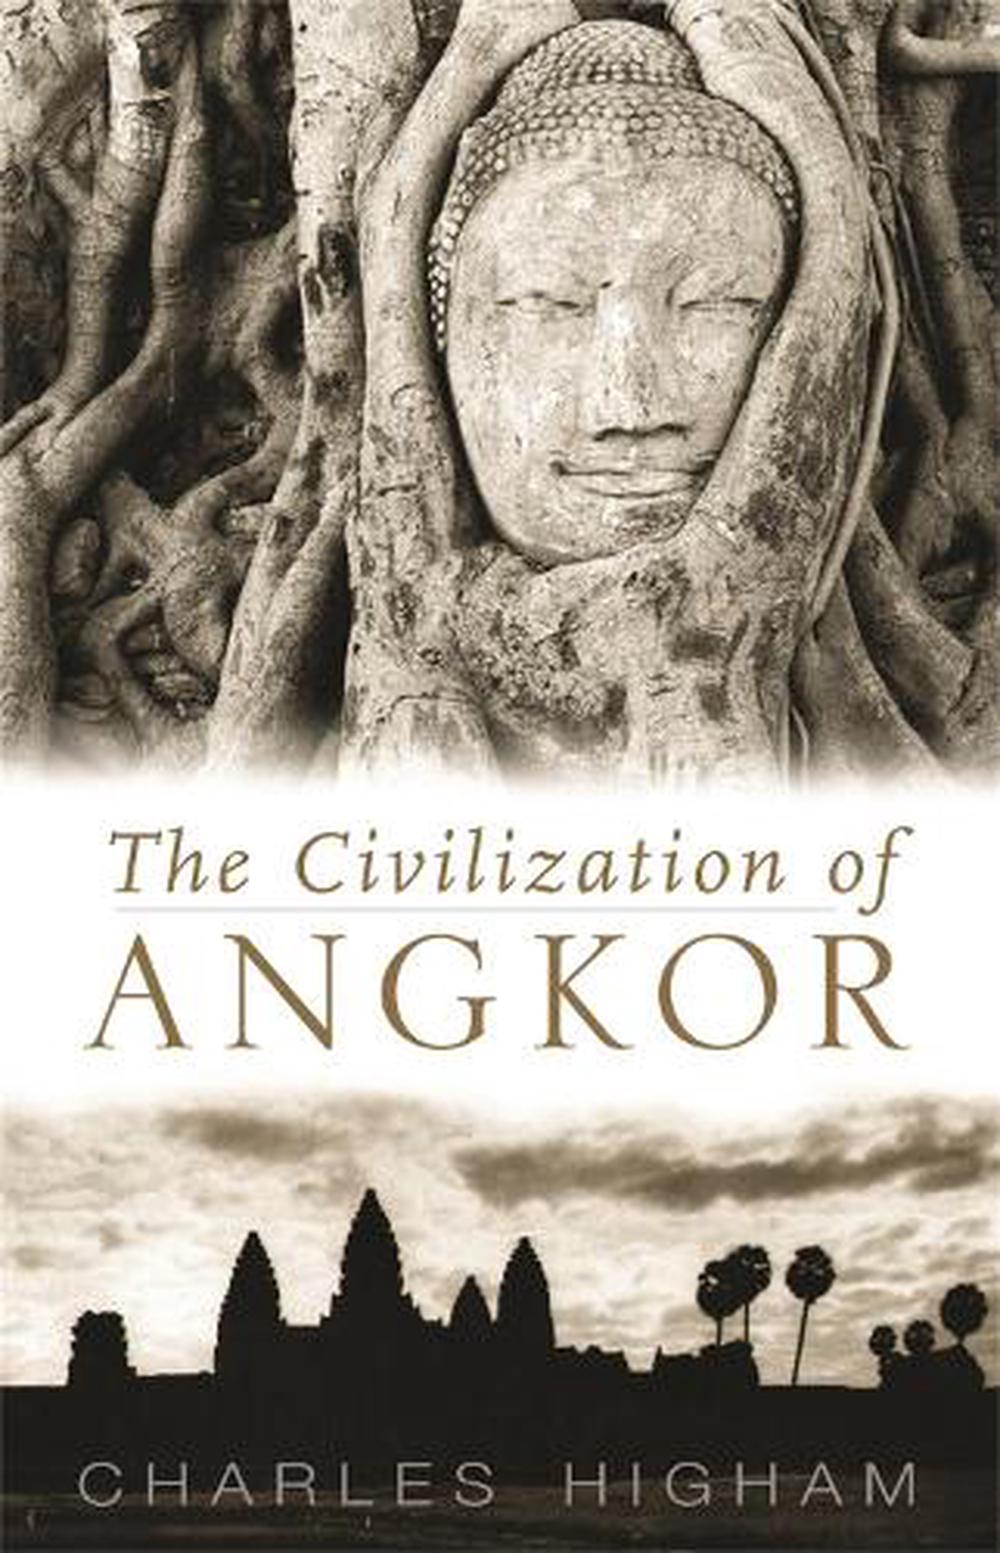 Angkor and the Khmer Civilization by Michael D. Coe